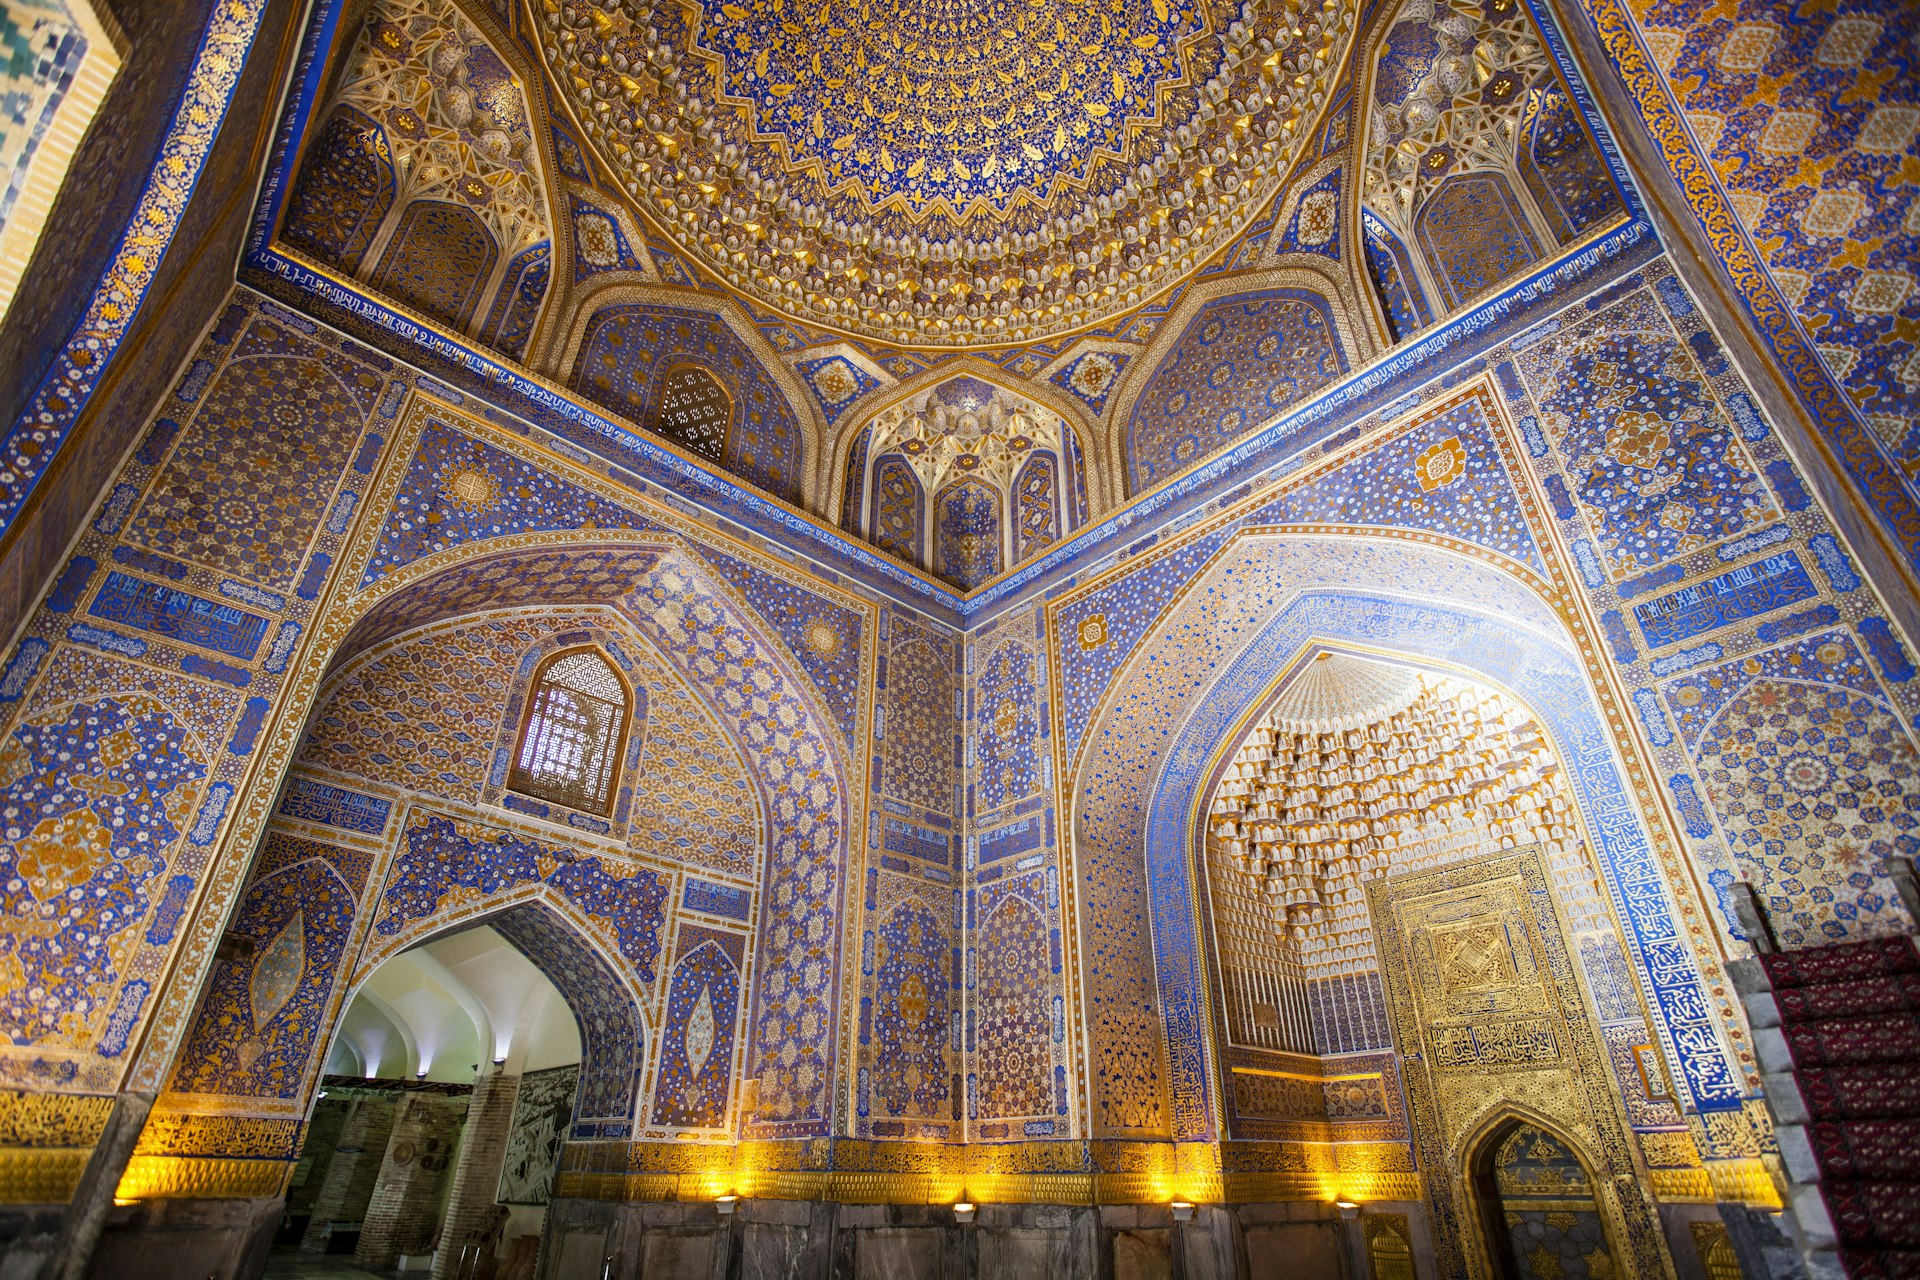 Intricately blue-and-gold tiled interior of a building with arched doorways and a central dome